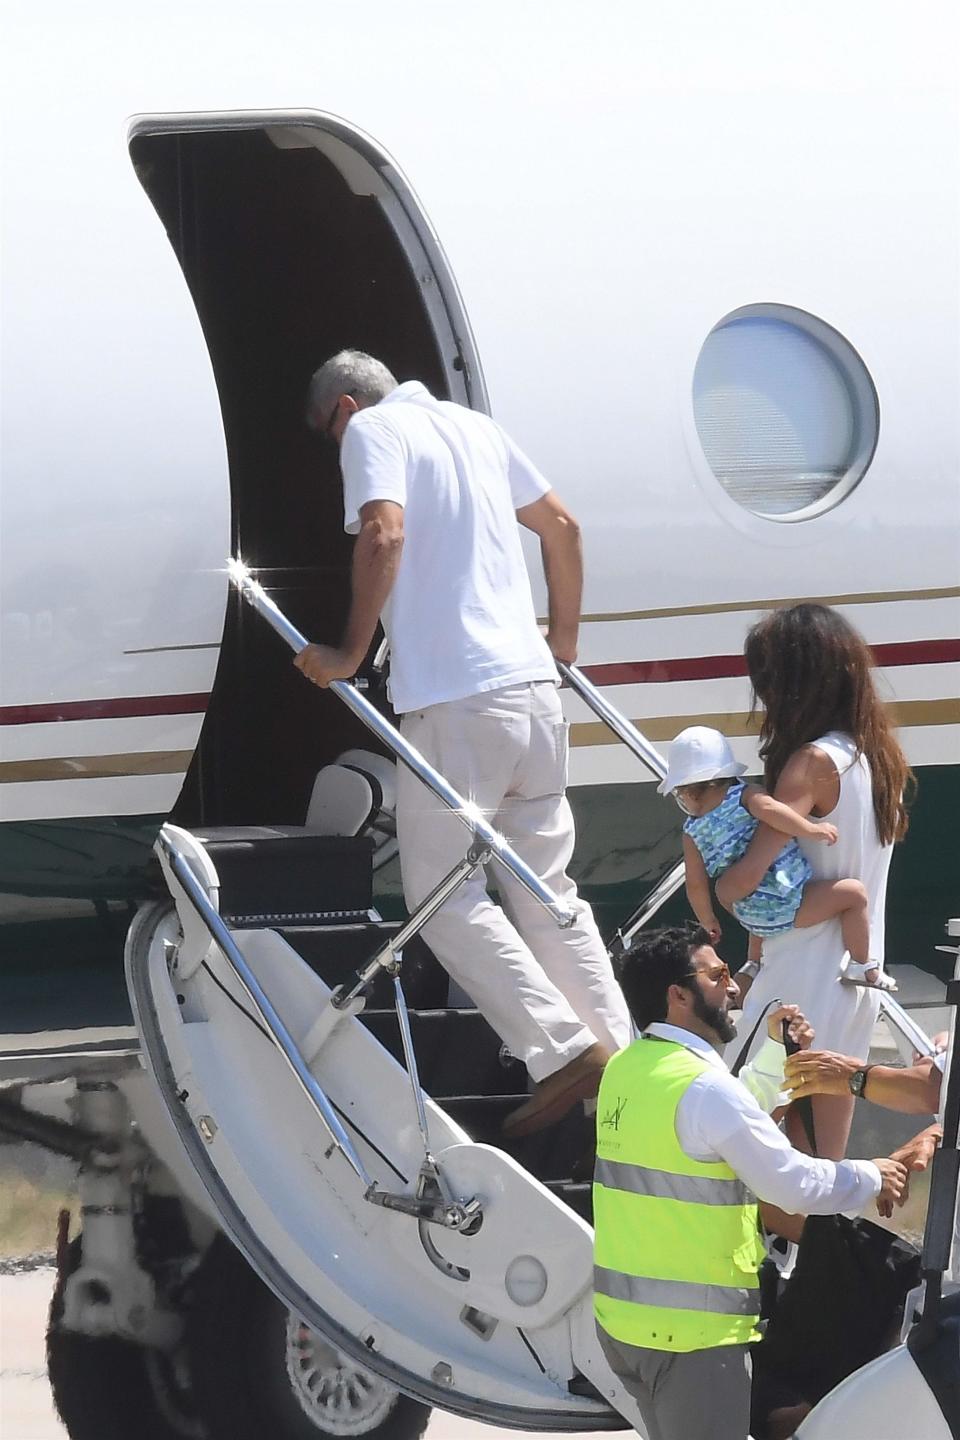 George Clooney boarding a plane to leave Sardinia on July 12 following his motorbike crash. His elbow appeared to have bruises and cuts on it, though it’s unclear if they were related to the crash. Source: BackGrid